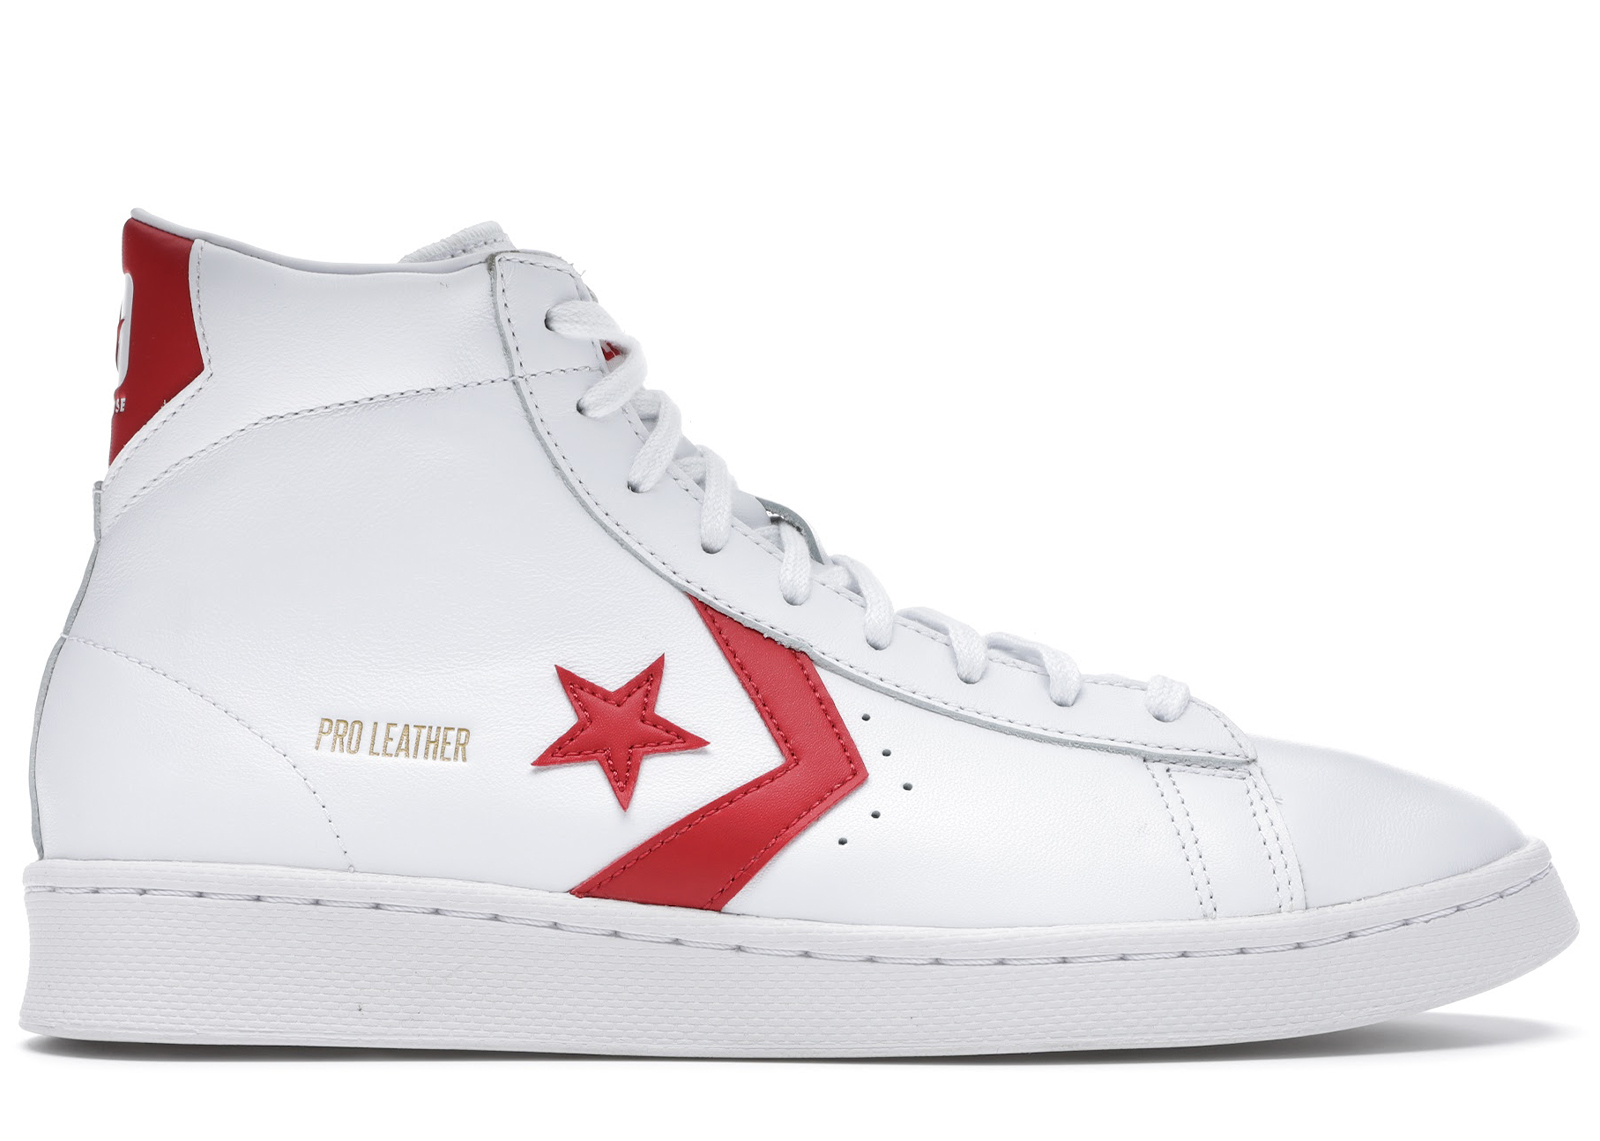 Converse Pro Leather Hi All-Star Pack